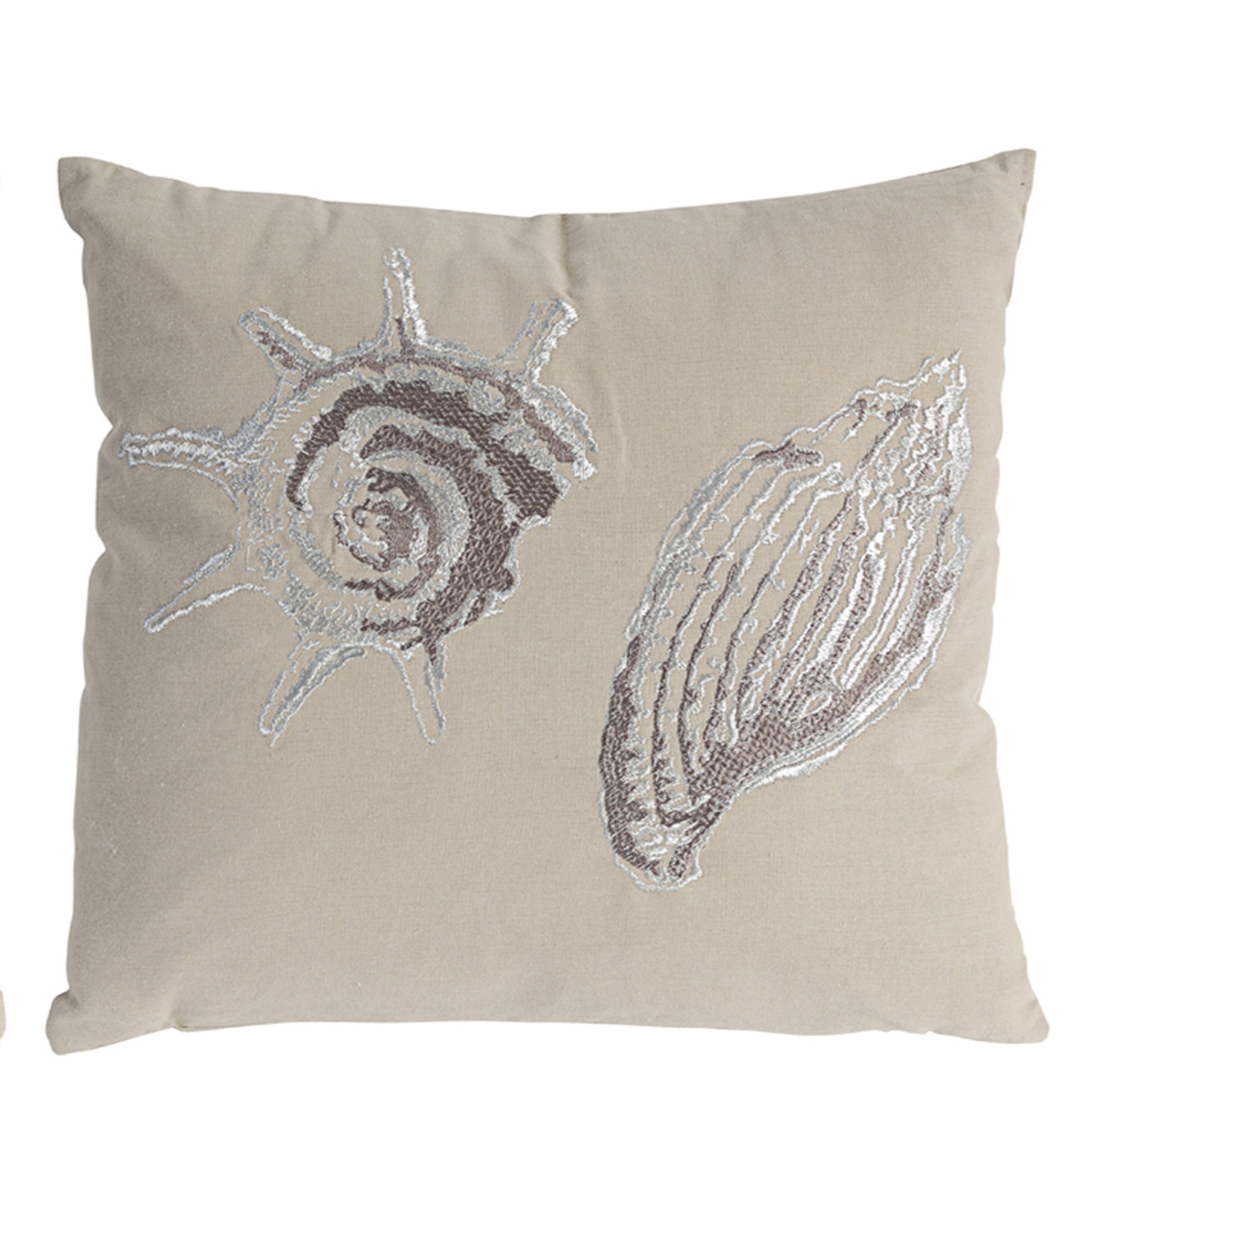 18 X 18 Inch Cotton Pillow With Seashell Embroidery, Set Of 2, Silver And Brown- Saltoro Sherpi